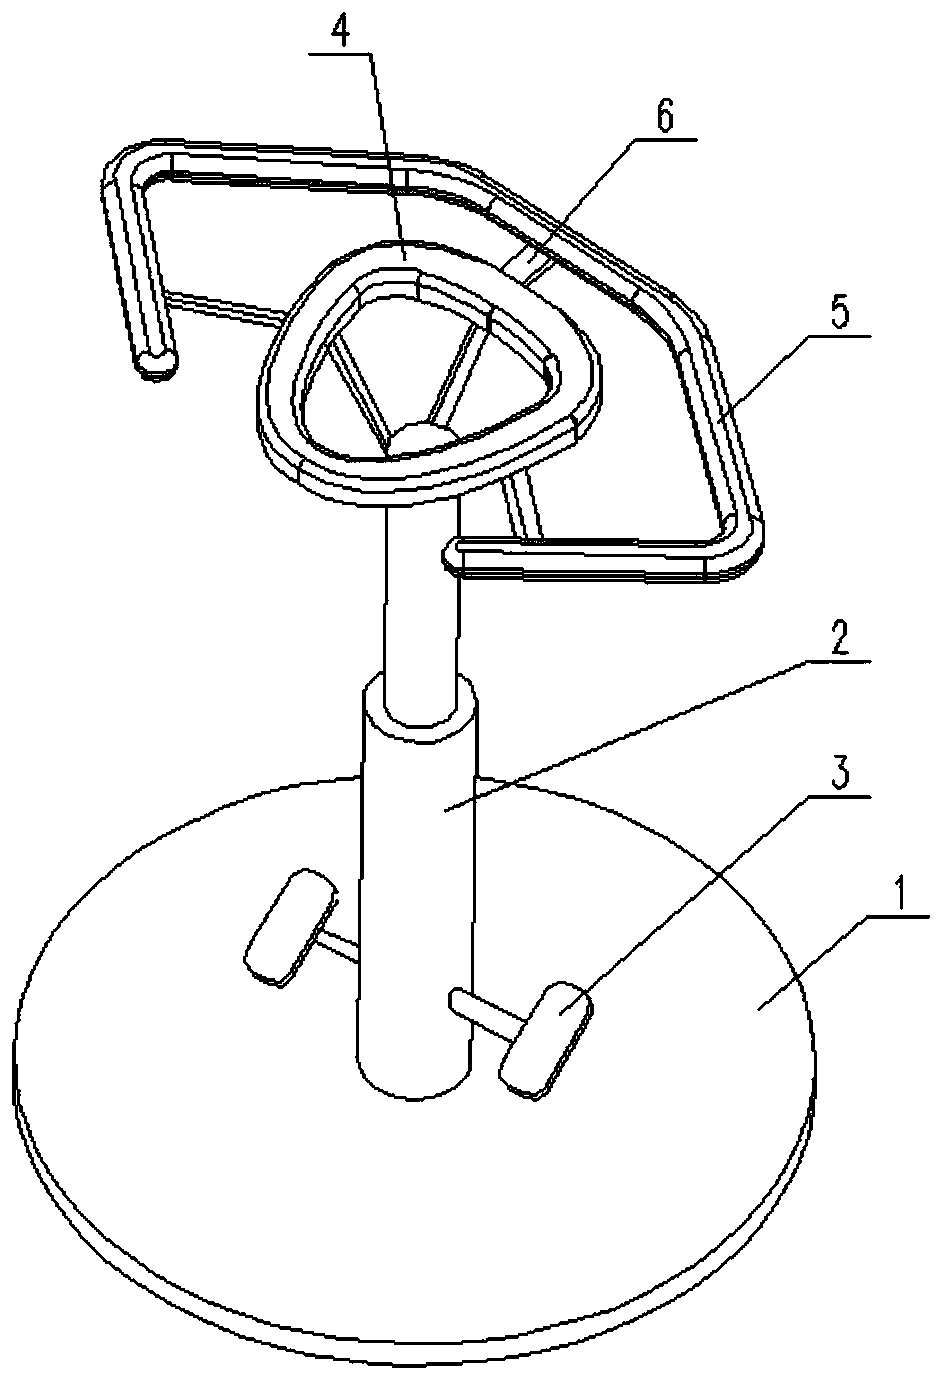 Intraspinal anesthesia support frame for facilitating sitting of patients